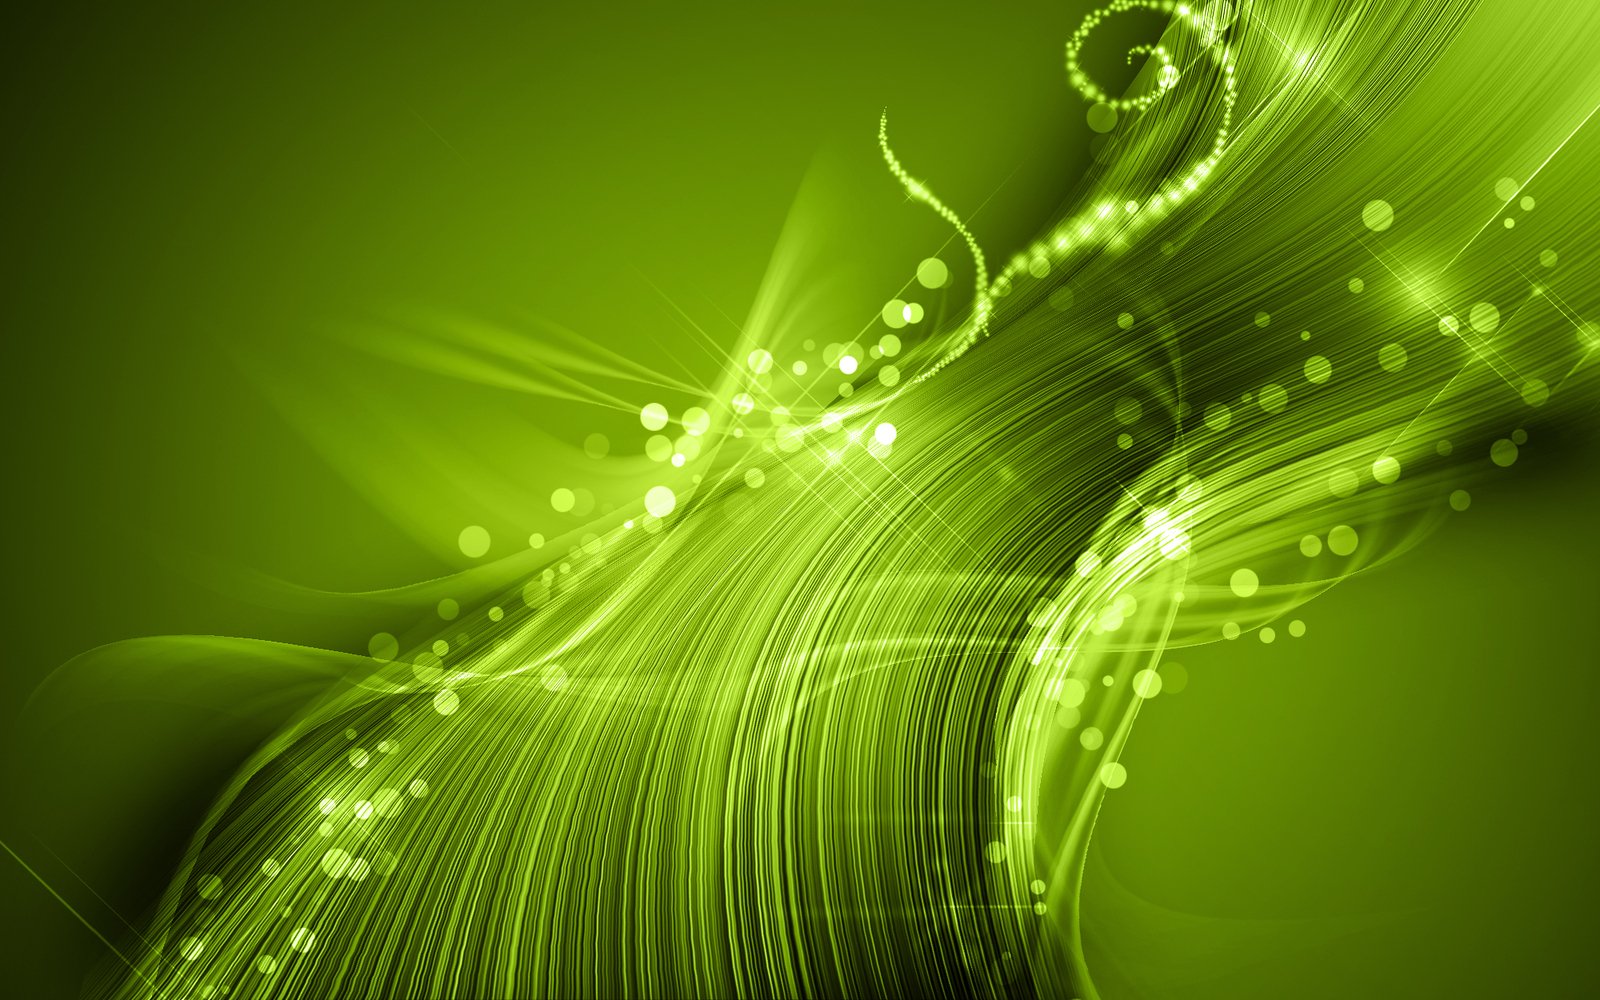 green and black abstract art background with some lights